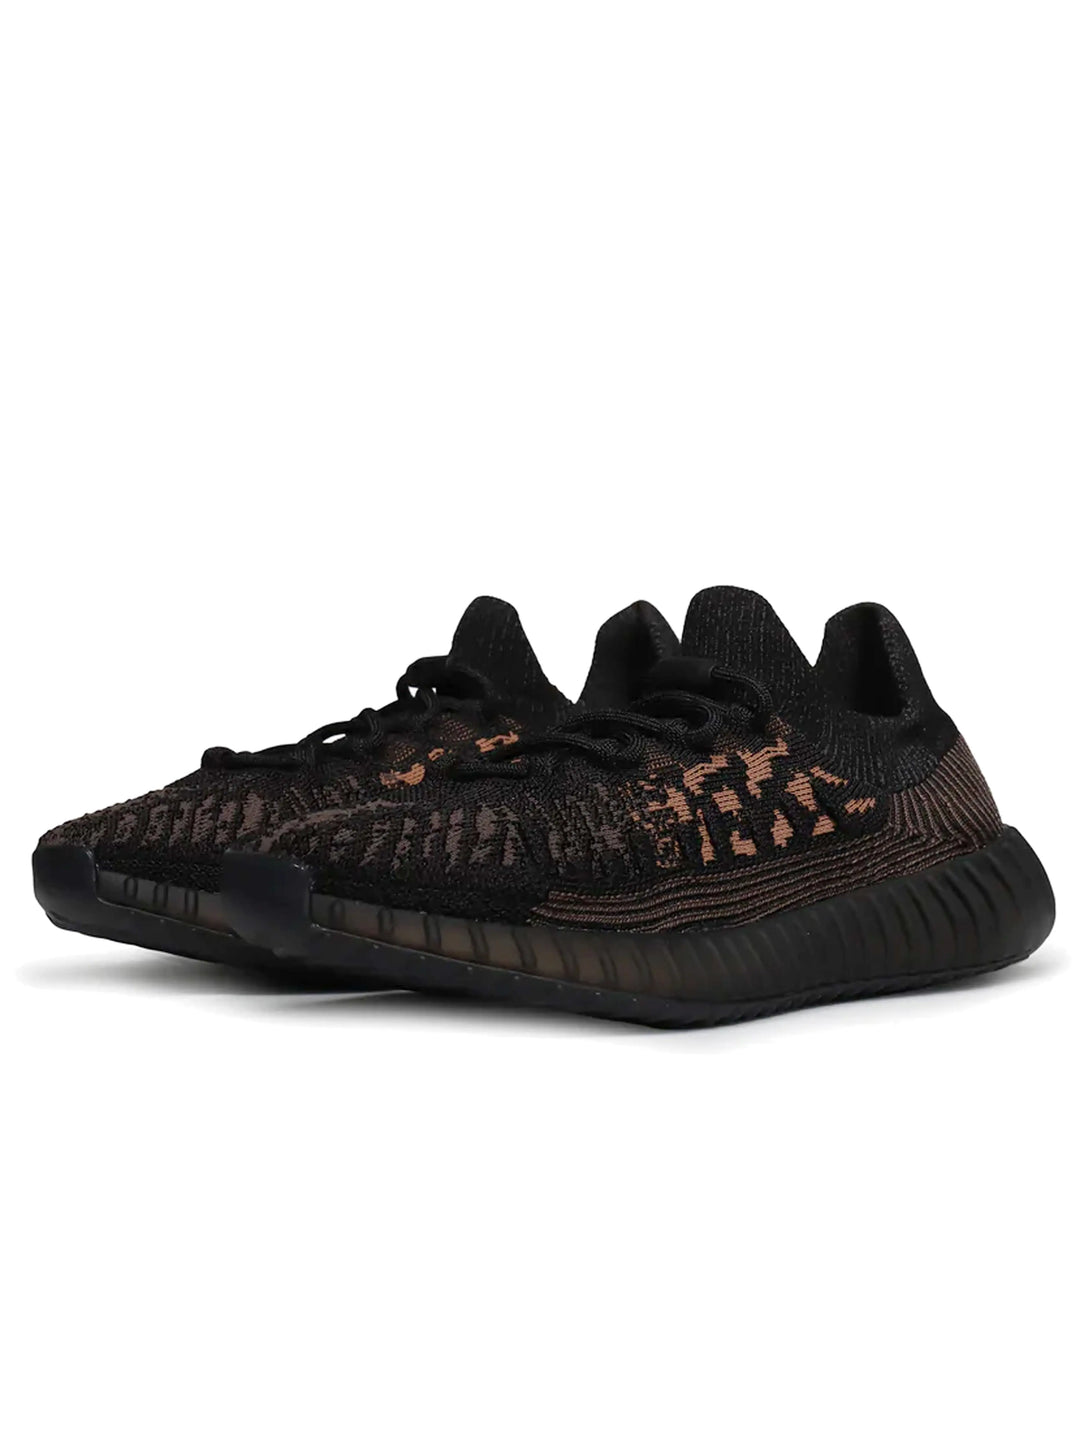 Adidas Yeezy Boost 350 V2 CMPCT Slate Carbon Prior